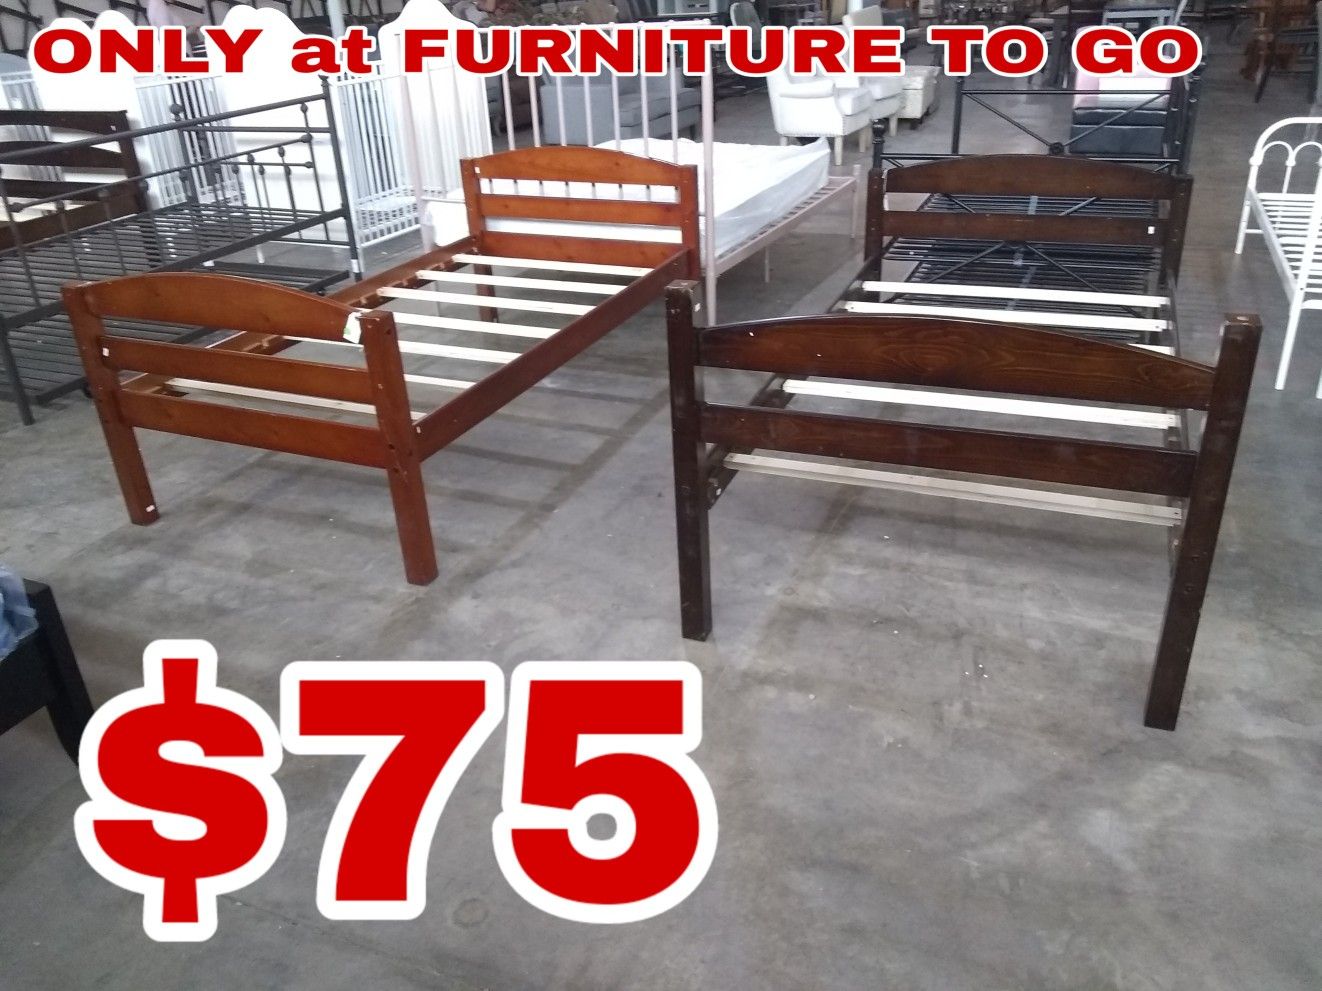 Twin bed $60 sale Tuesday 😎 2759 Irving Blvd Dallas 75207😎